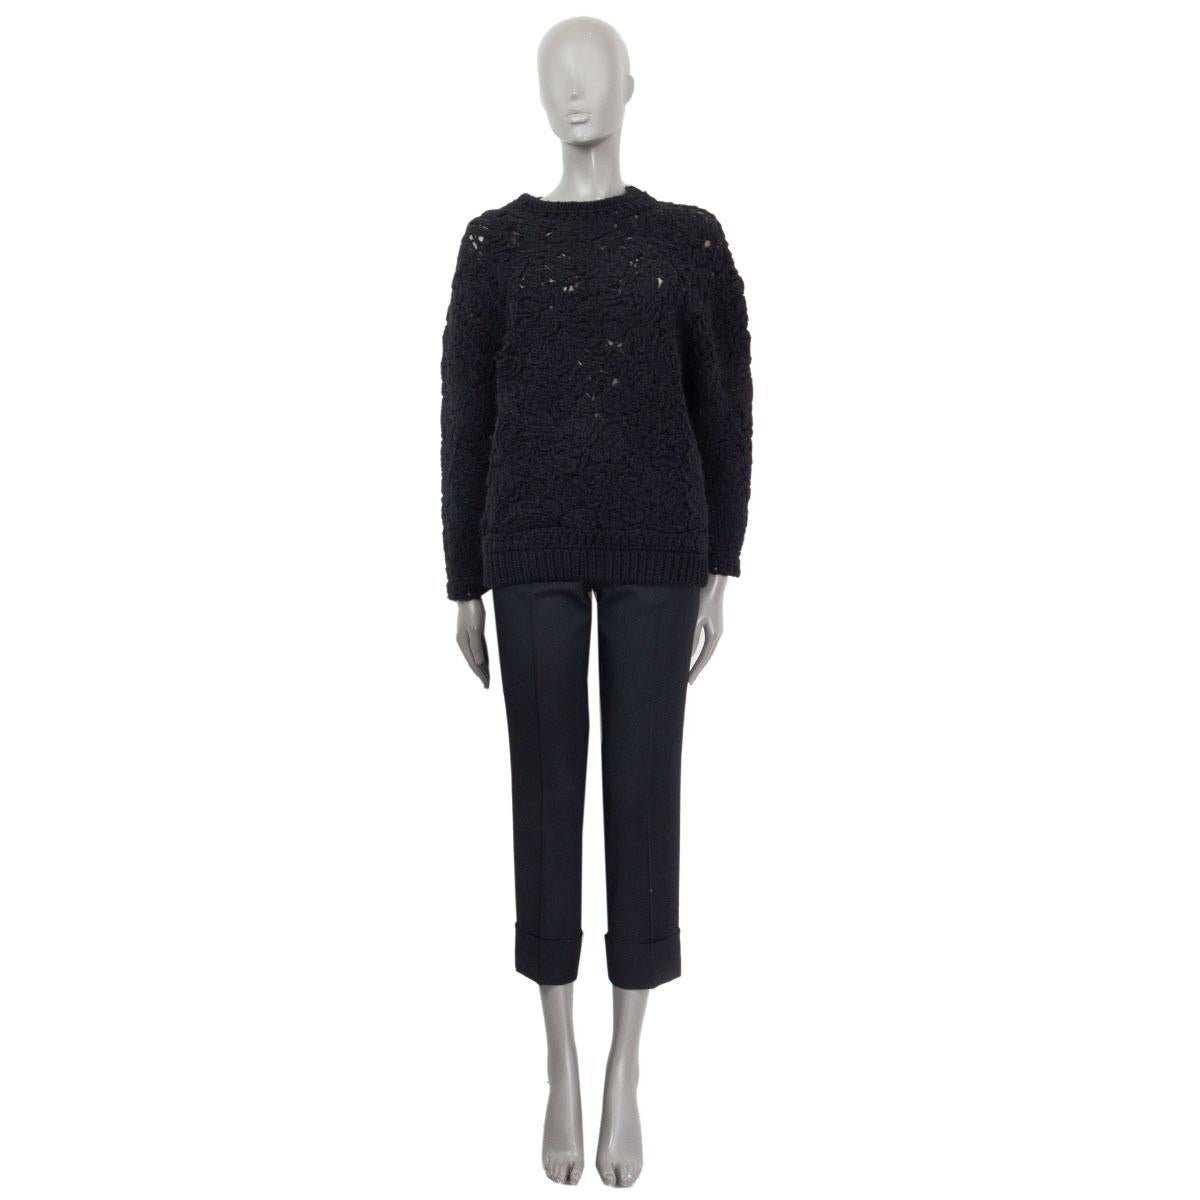 100% authentic Stella McCartney oversized chunky flowr-pattern knit sweater in black wool (45%), acrylic (30%) and alpaca (25%). Has been worn and is in excellent condition. 

Measurements
Tag Size	38
Size	XS
Shoulder Width	114cm (44.5in)
Bust